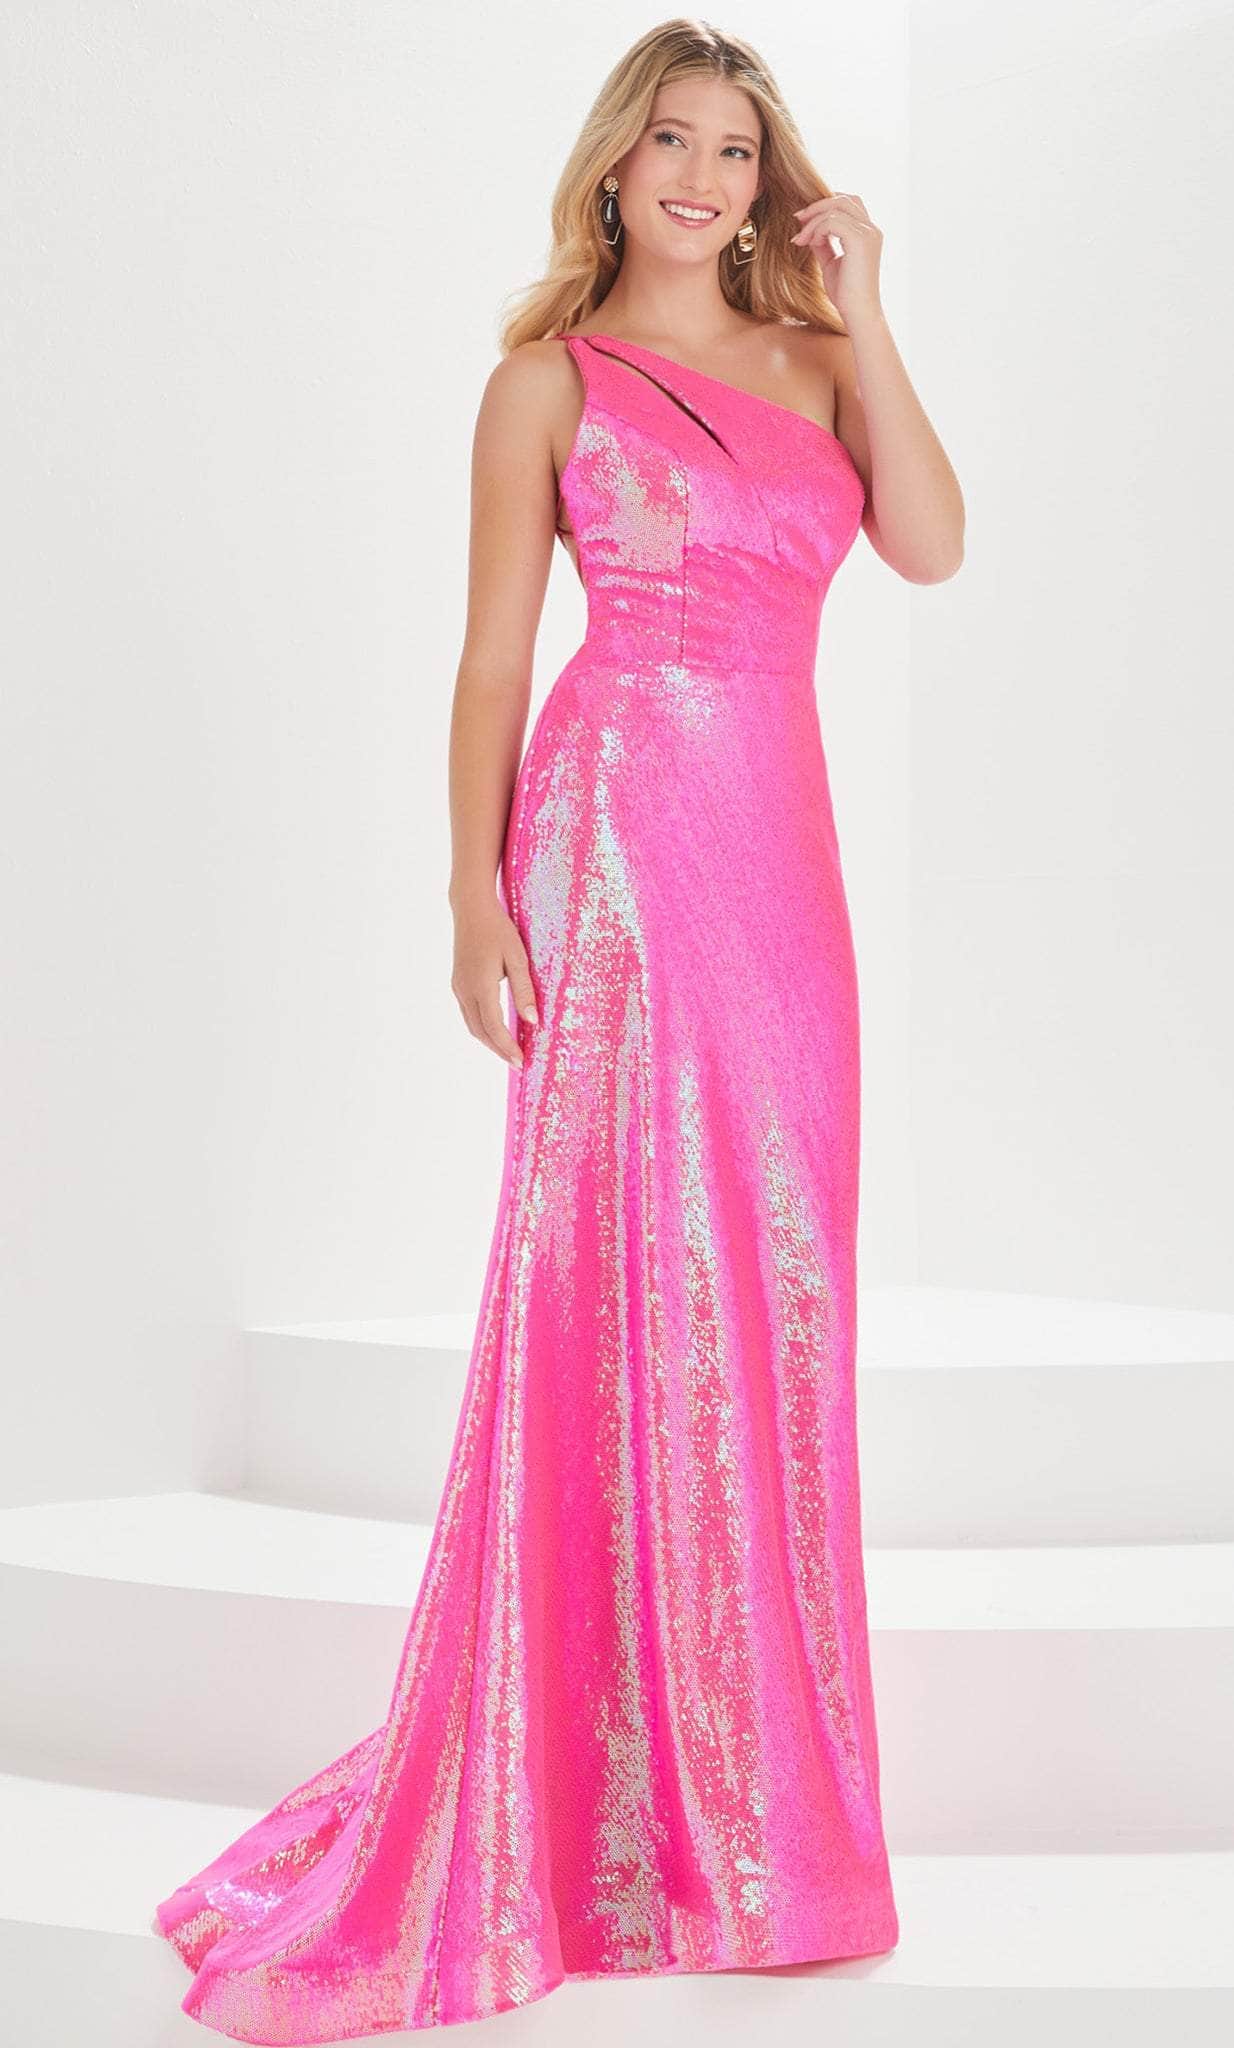 Image of Tiffany Designs by Christina Wu 16006 - Sequined Prom Gown